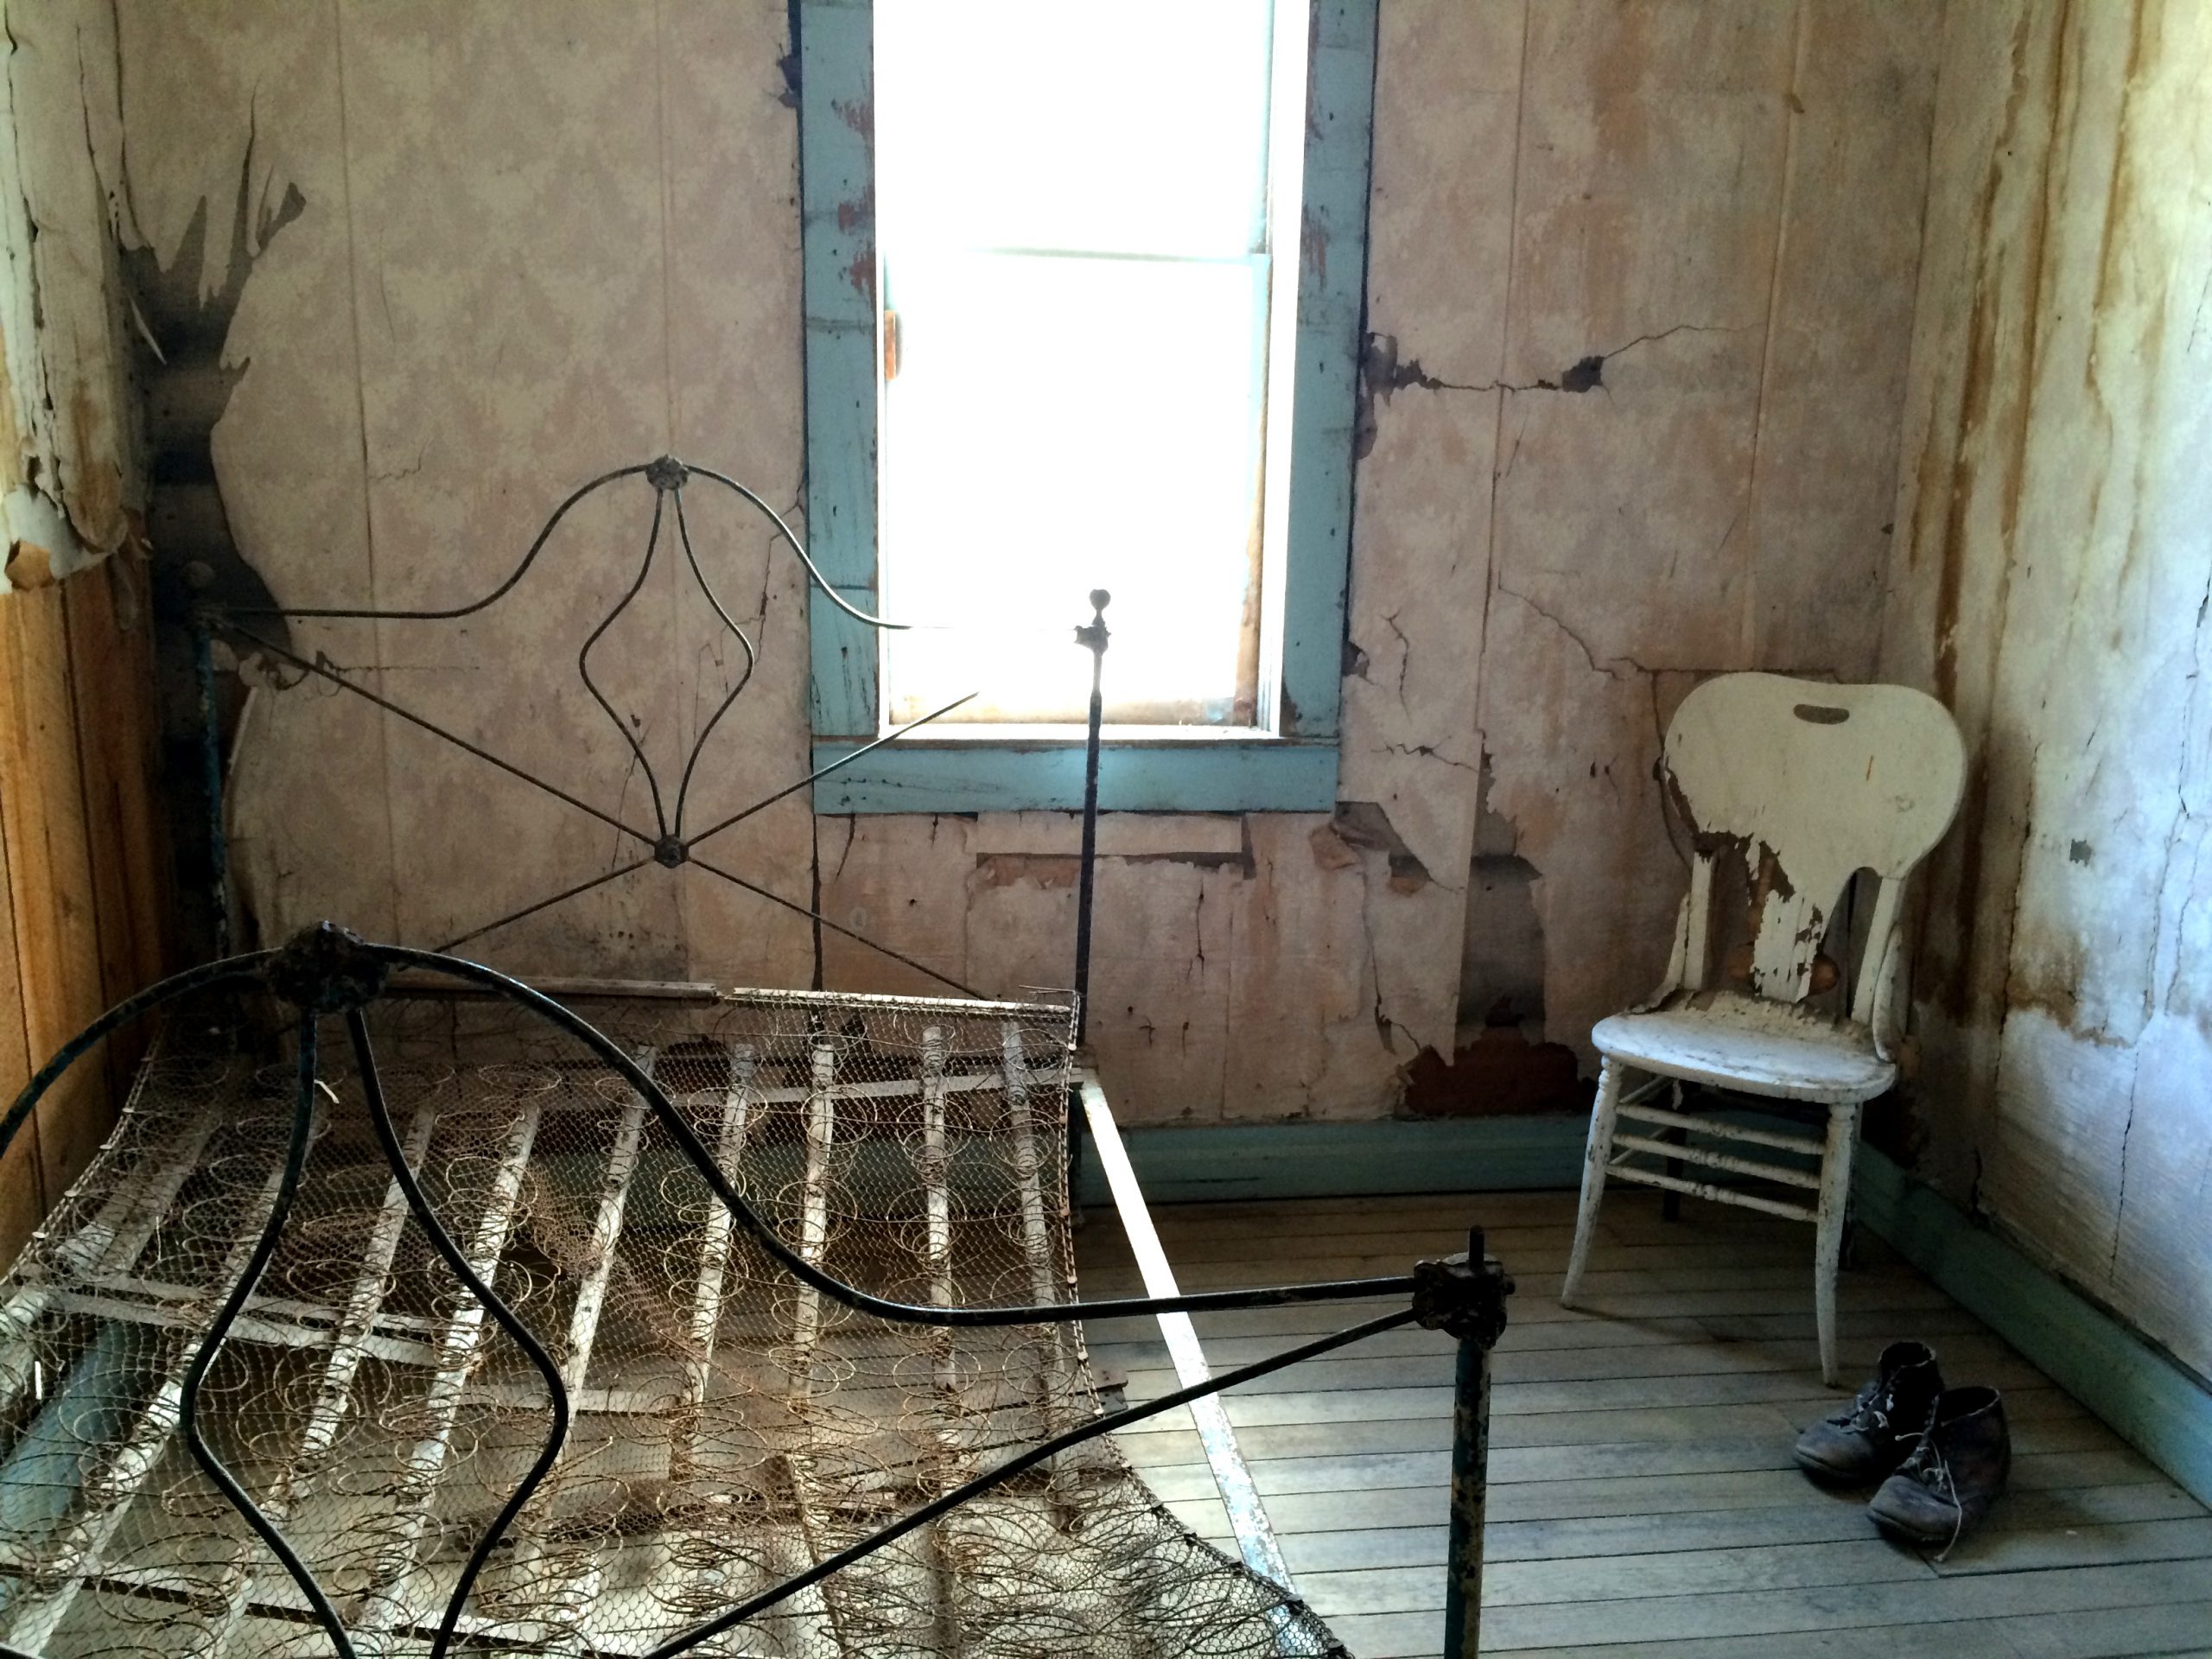 A rusty bedspring in an abandoned room